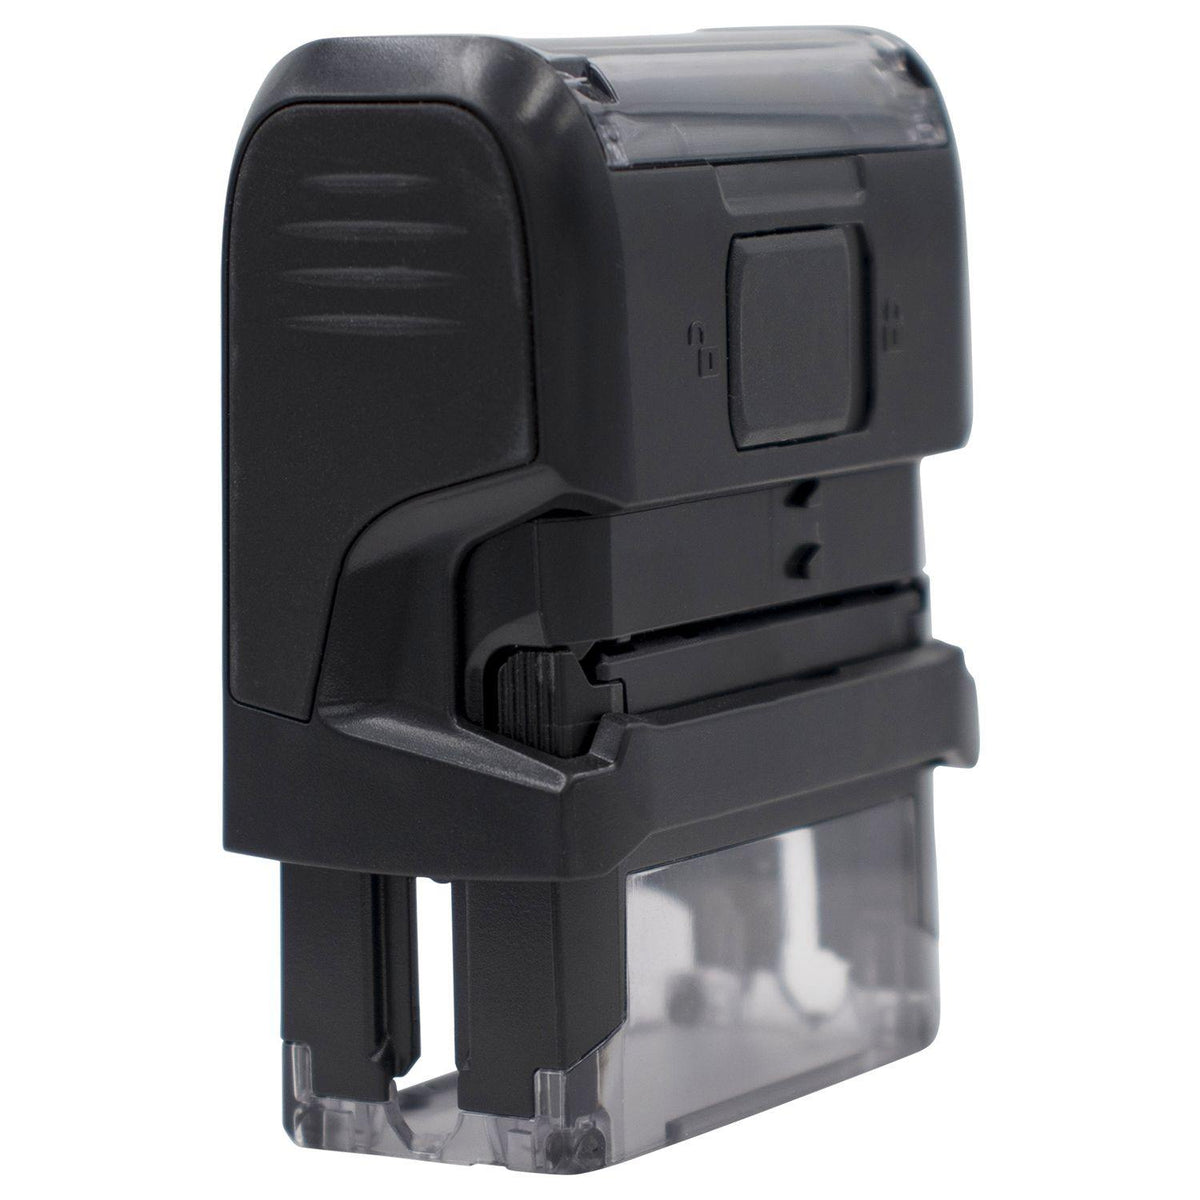 Self-Inking Despachado Stamp - Engineer Seal Stamps - Brand_Trodat, Impression Size_Small, Stamp Type_Self-Inking Stamp, Type of Use_Office, Type of Use_Shipping &amp; Receiving